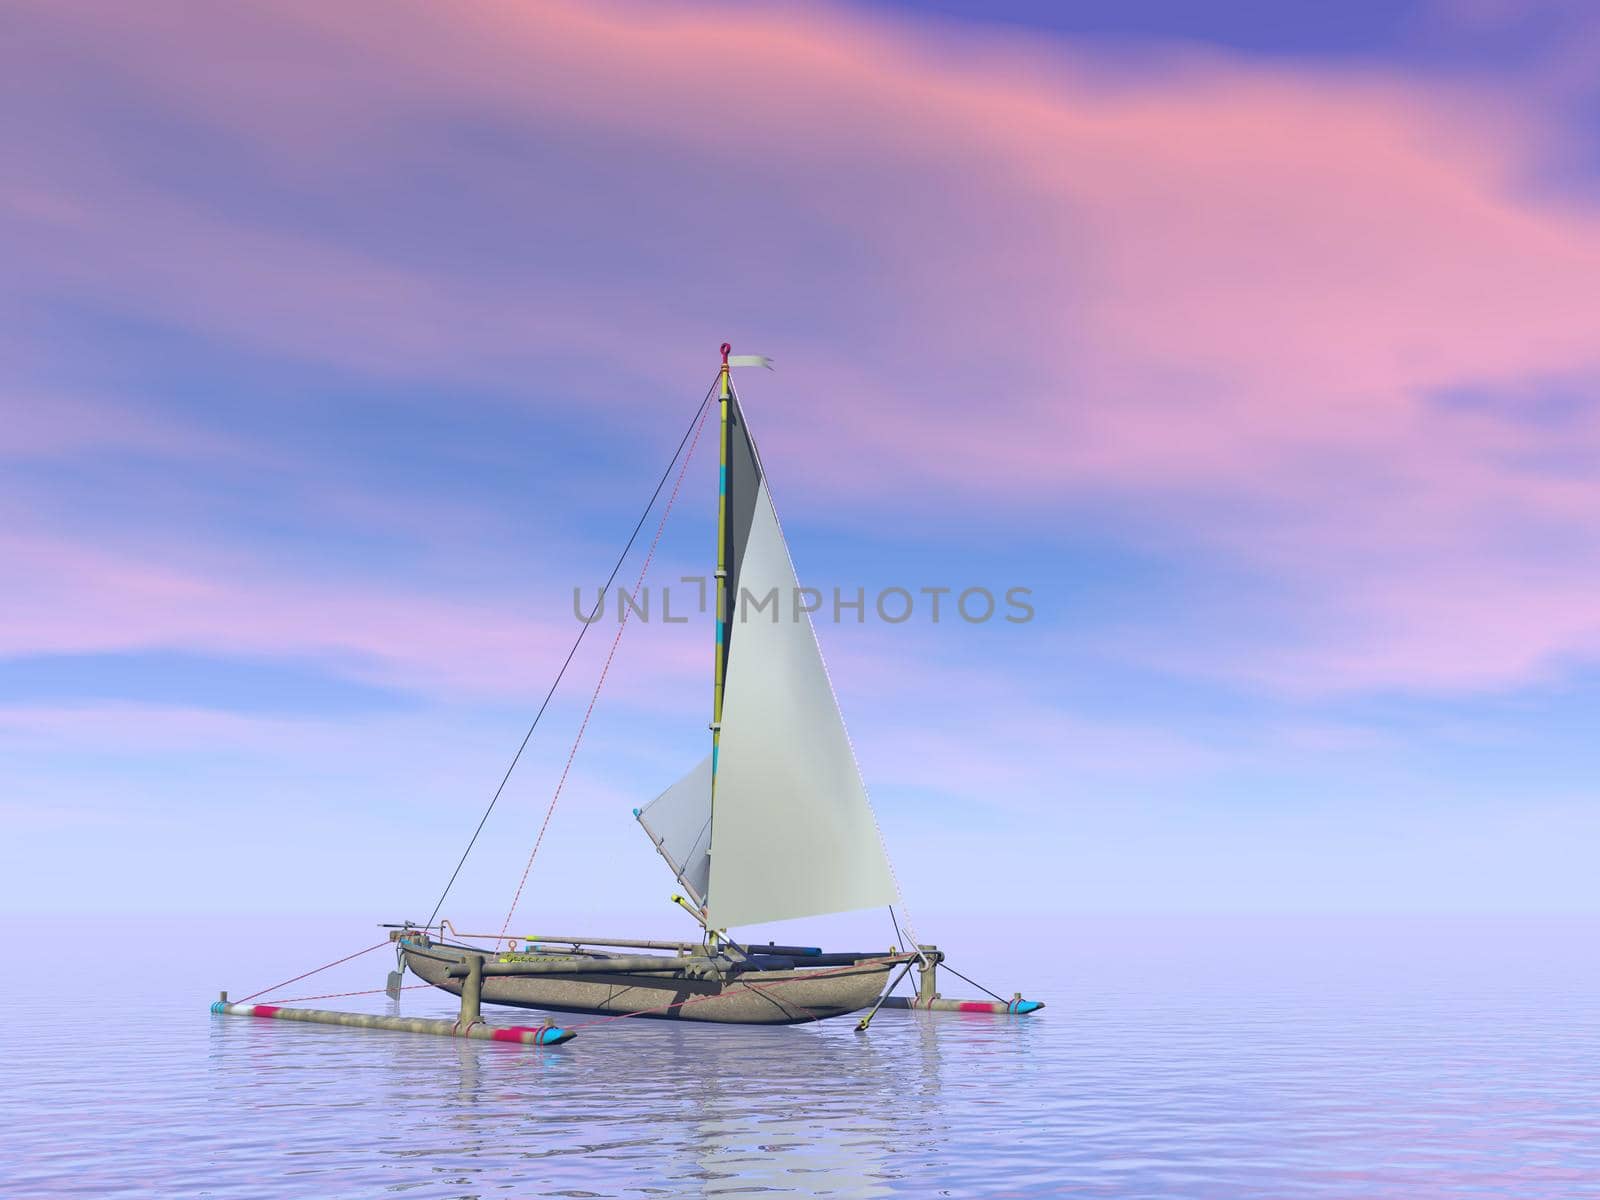 Trimaran boat by sunset - 3D render by Elenaphotos21